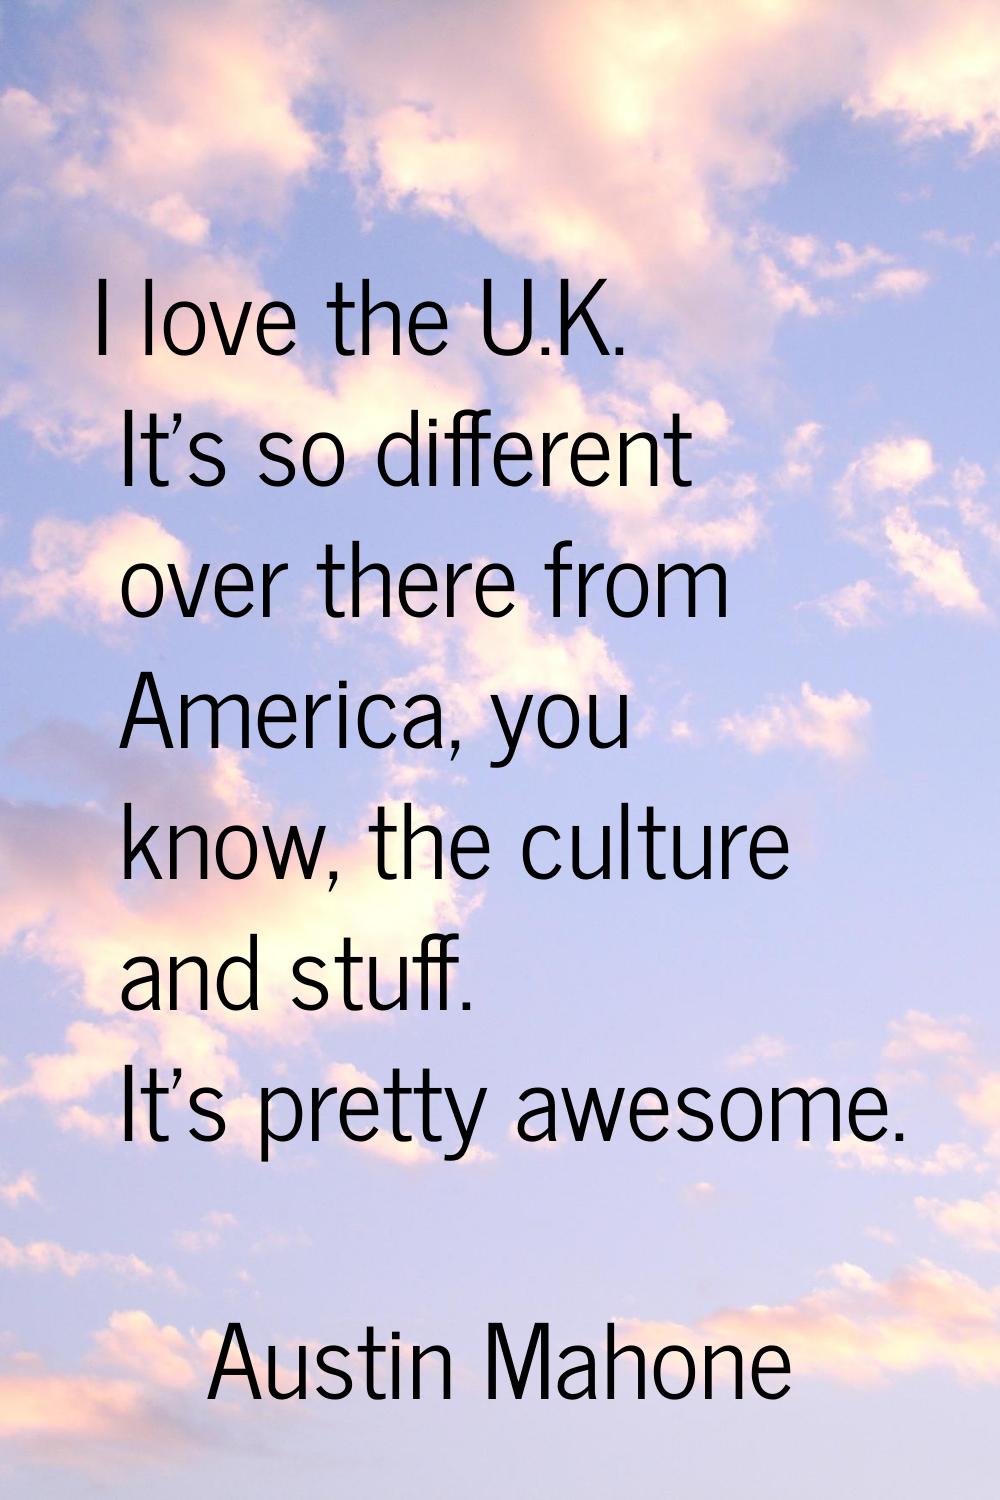 I love the U.K. It's so different over there from America, you know, the culture and stuff. It's pr